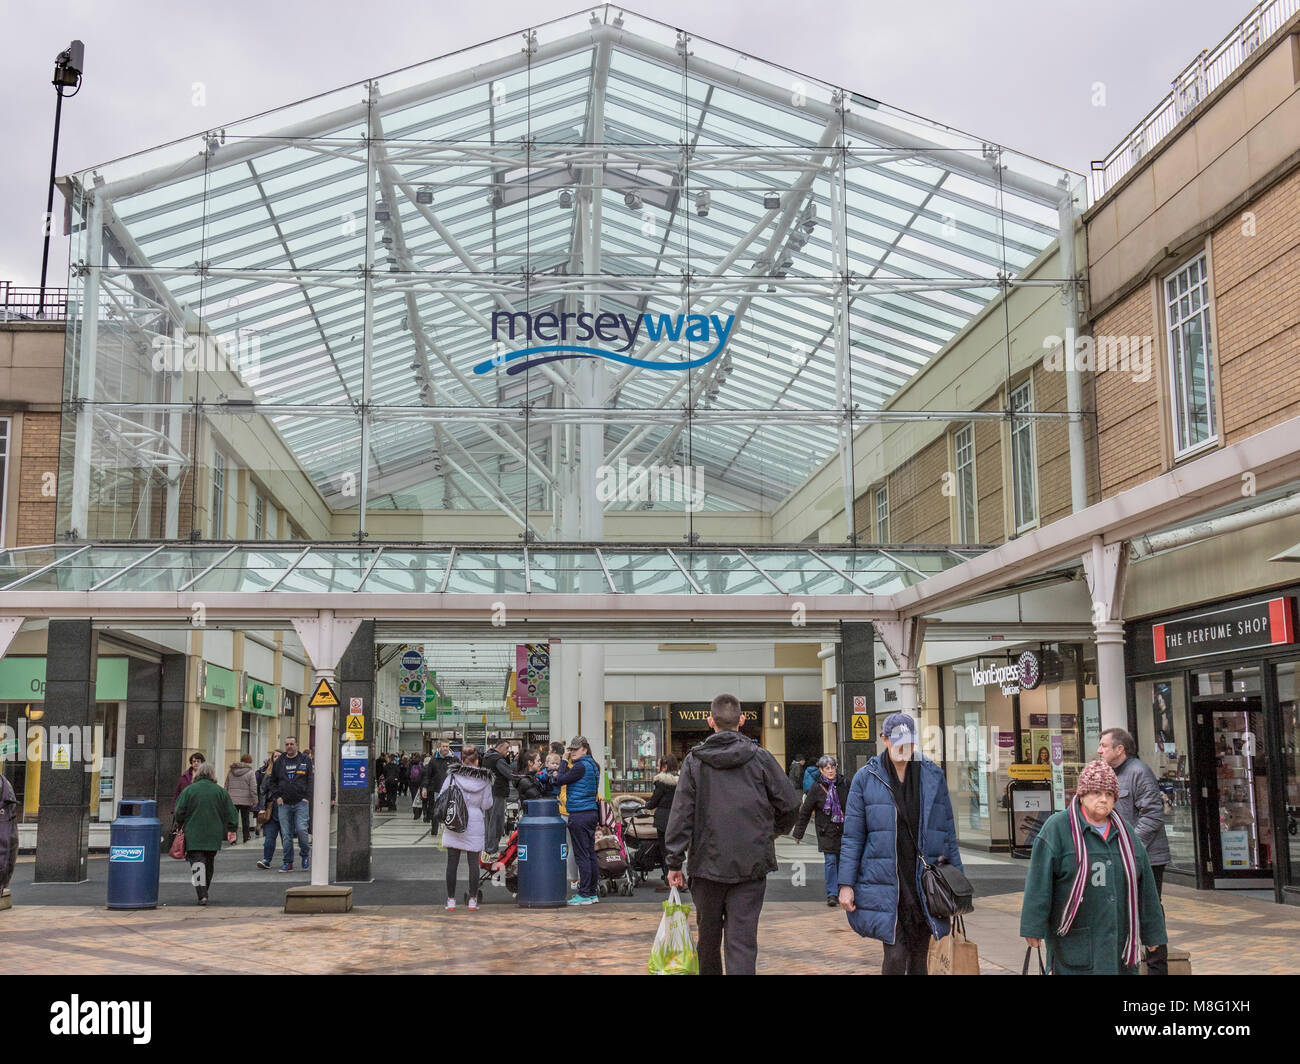 Merseyway Shopping Centre, Stockport Town Centre, Greater Manchester, UK Stock Photo